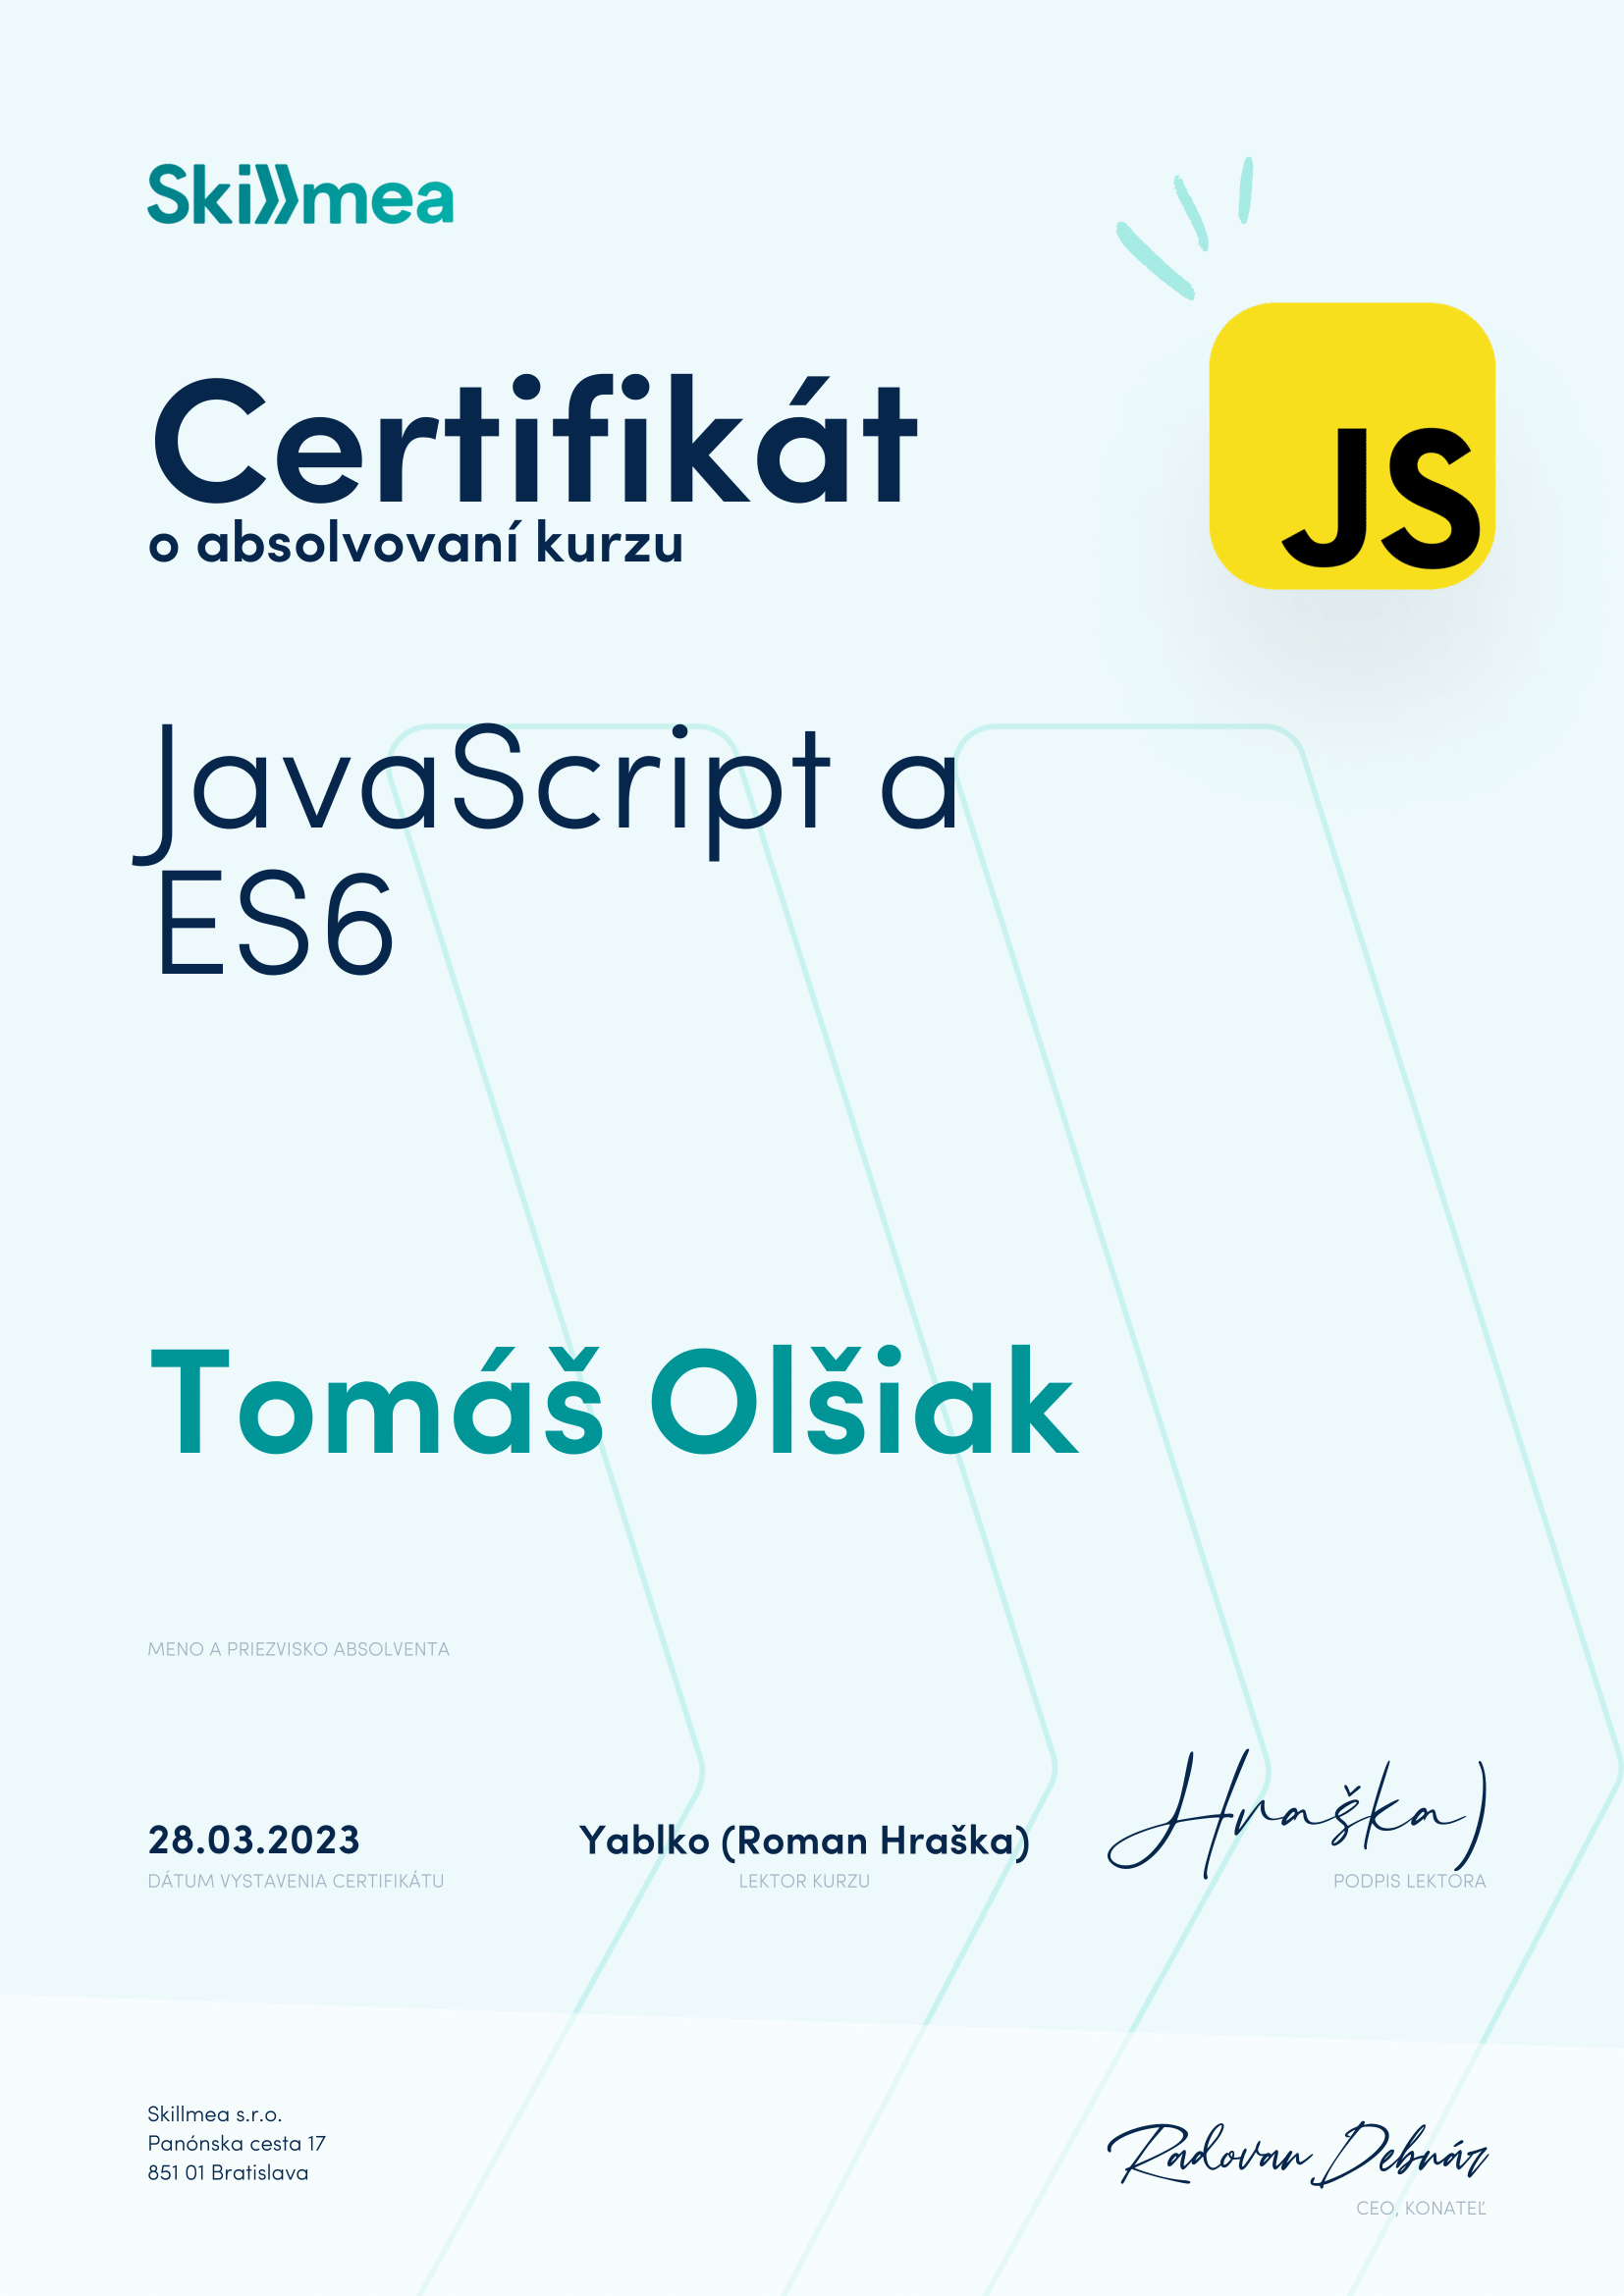 photo of my certificate for Javascript and ES6